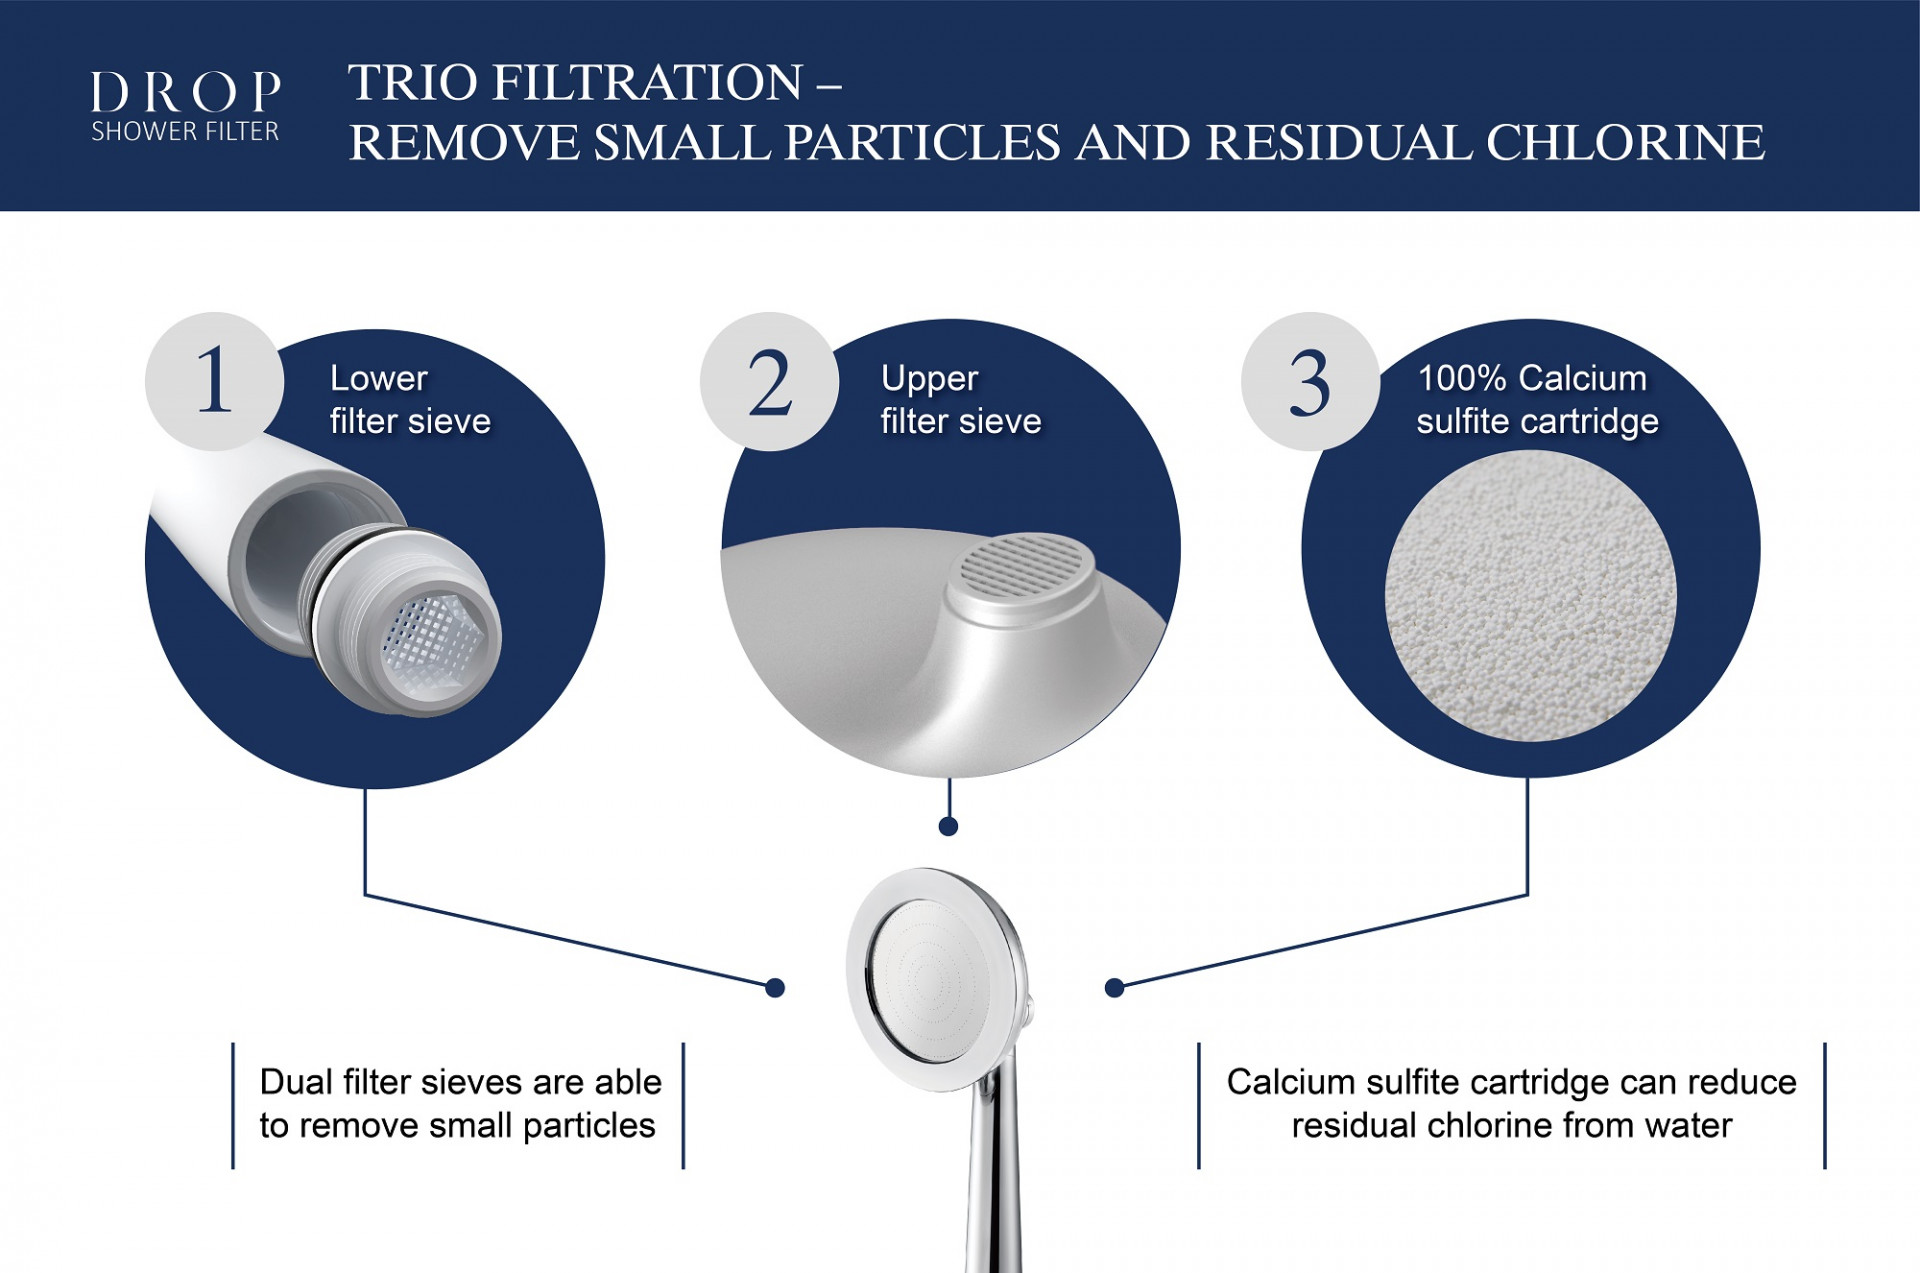 WALL-MOUNT SHOWER TRIO FILTRATION REMOVE SMALL PARTICLES AND RESIDUAL CHLORINE